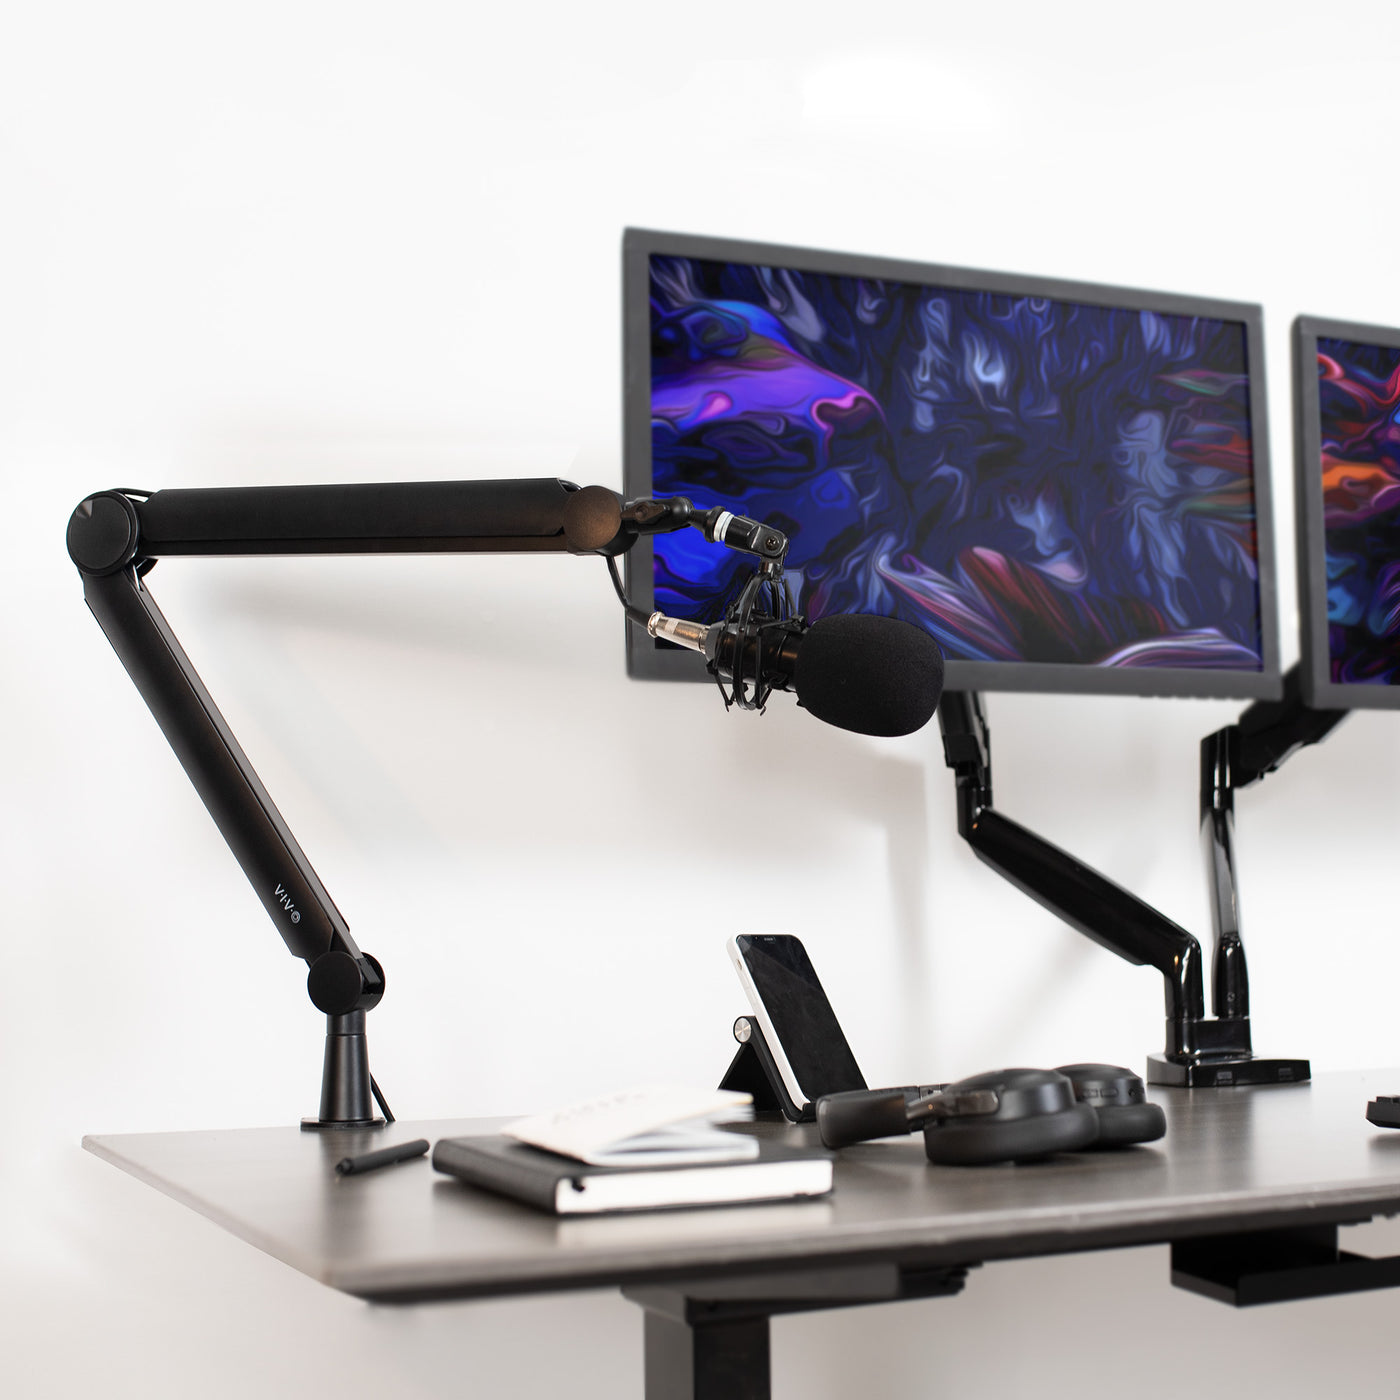 Elevate your mic or boom in your workspace to more comfortably produce content.